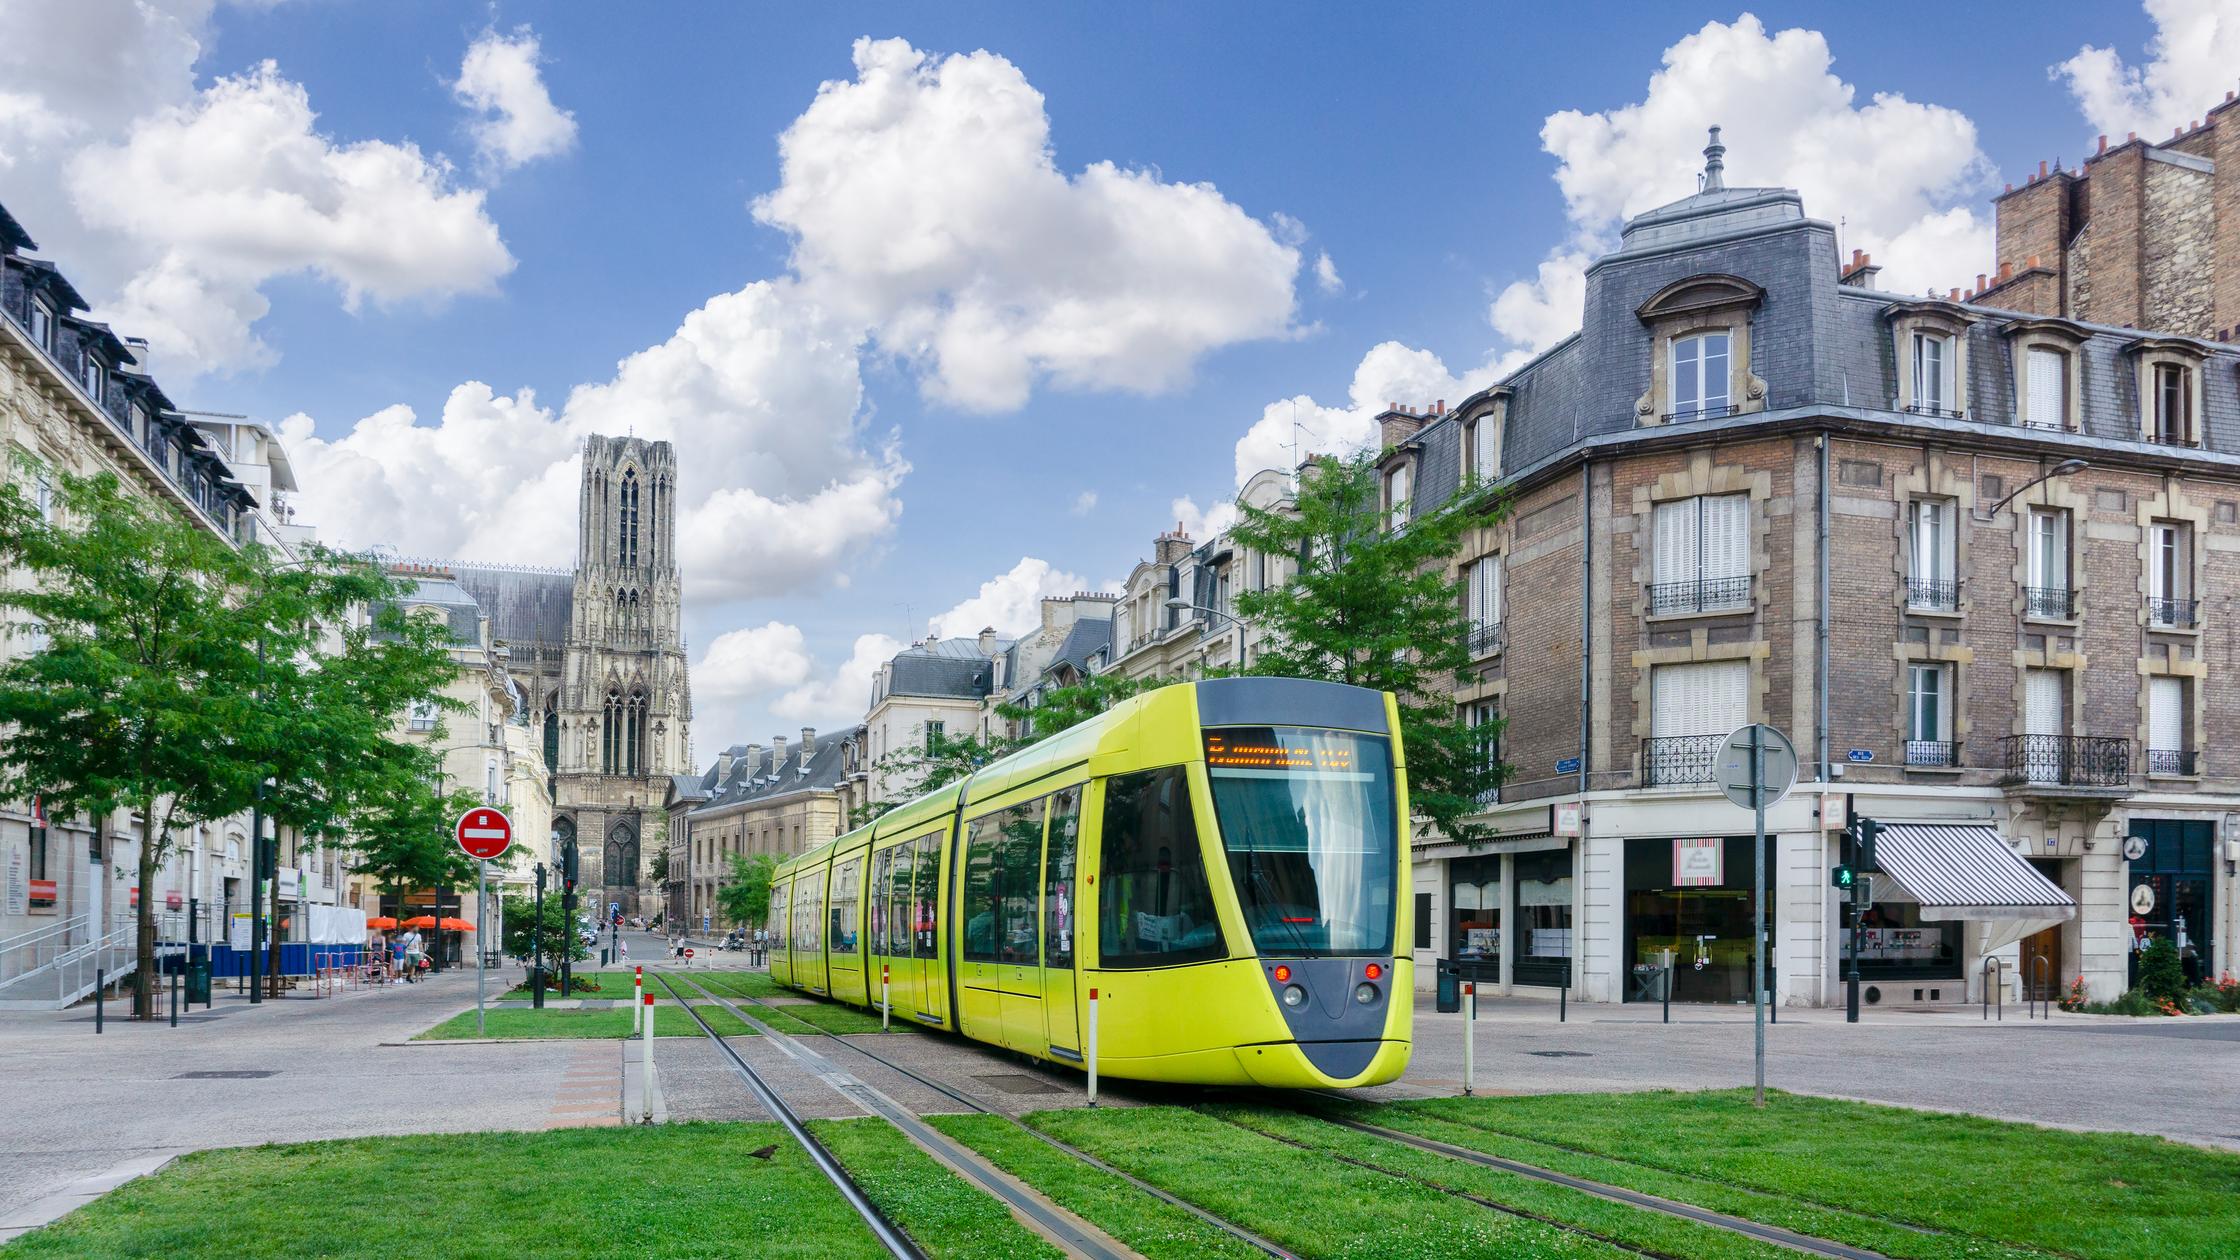 Tram in city with grass and buildings